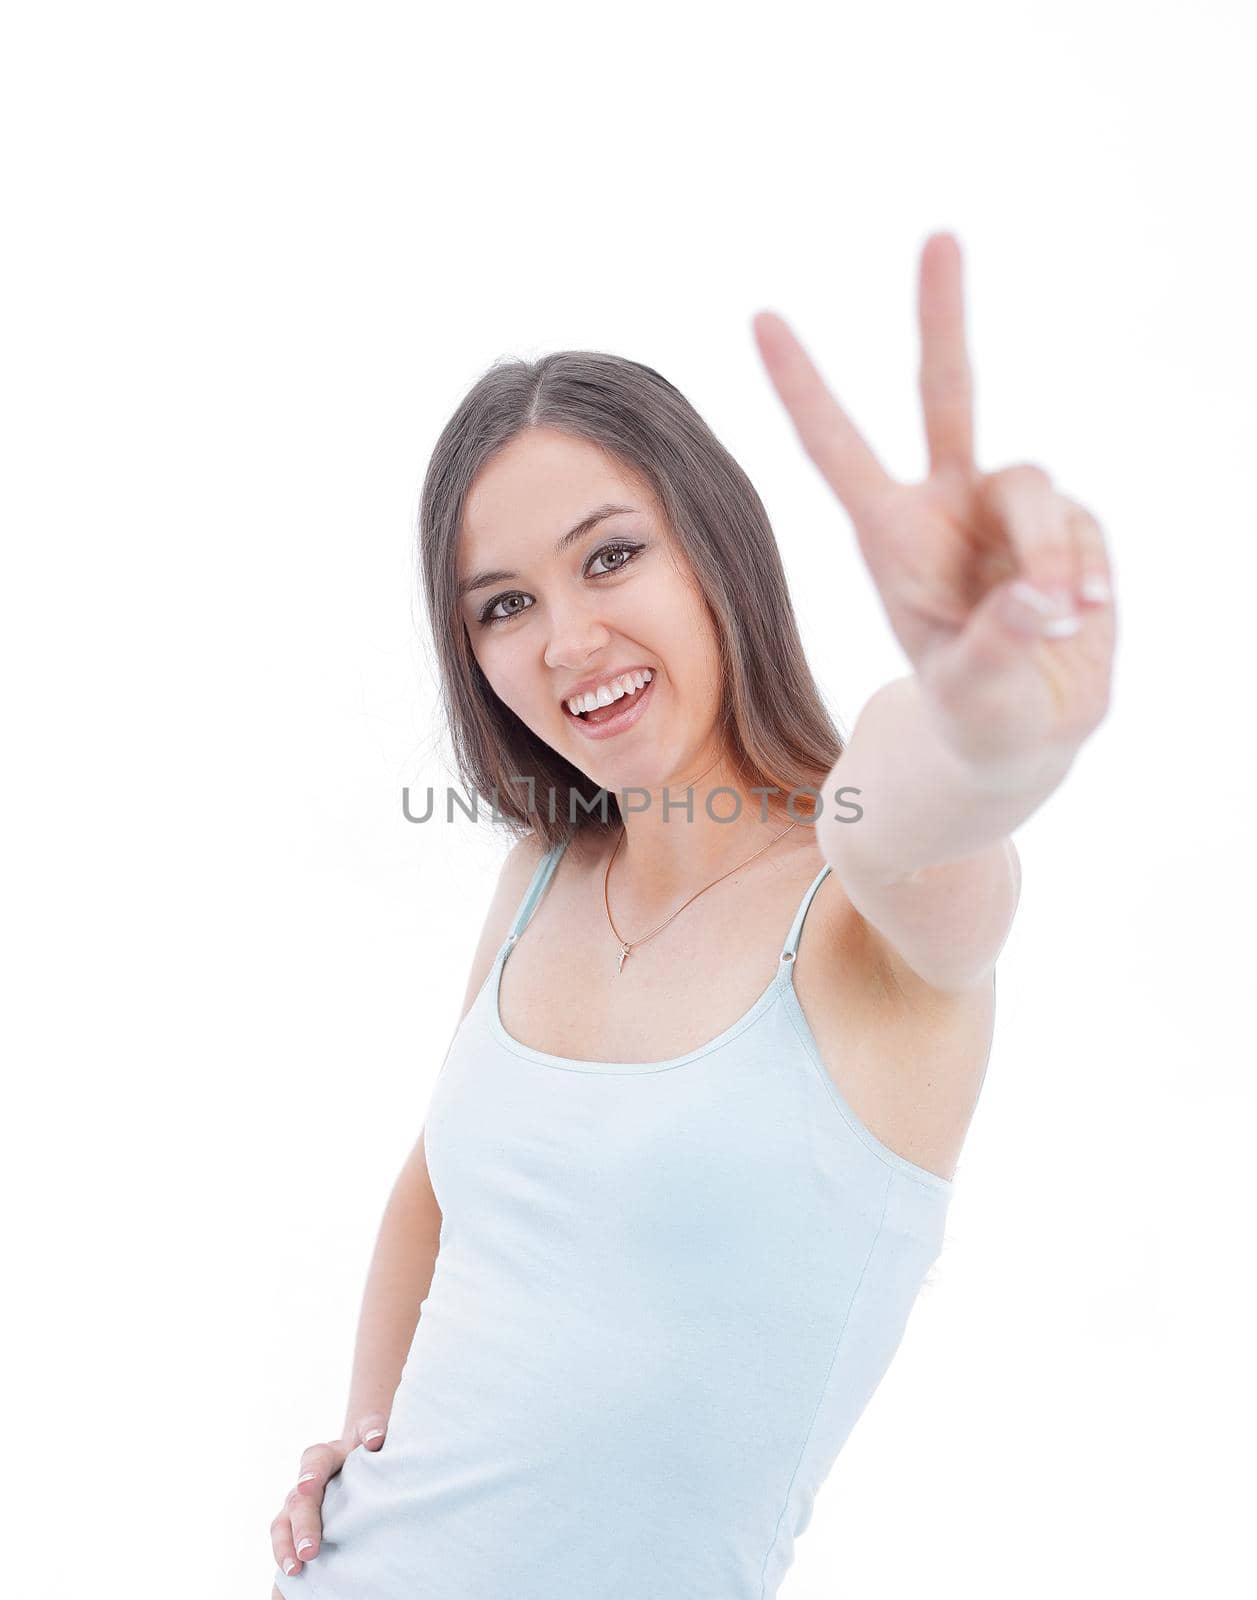 modern young woman showing victory sign.